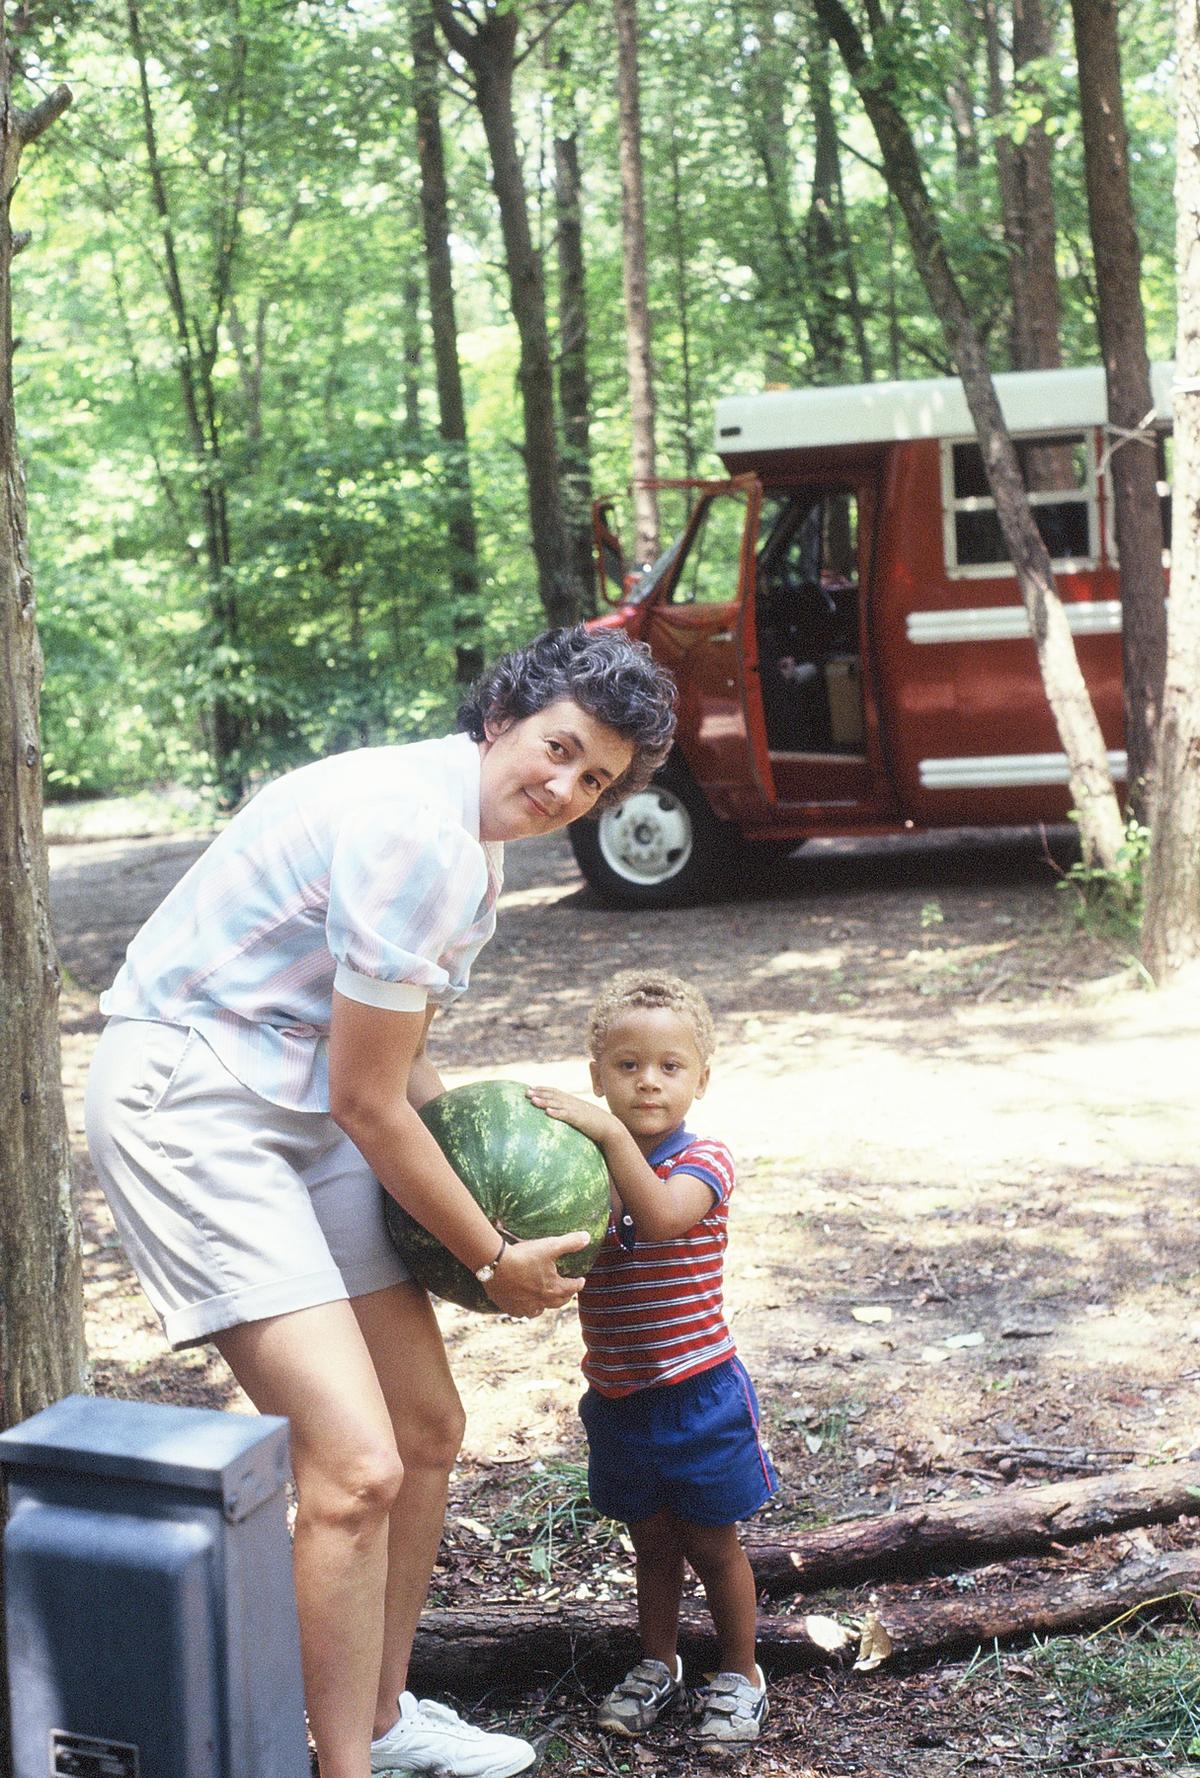 A childhood photo of Mr. Holland with his adoptive mother. (Courtesy of Steventhen Holland)